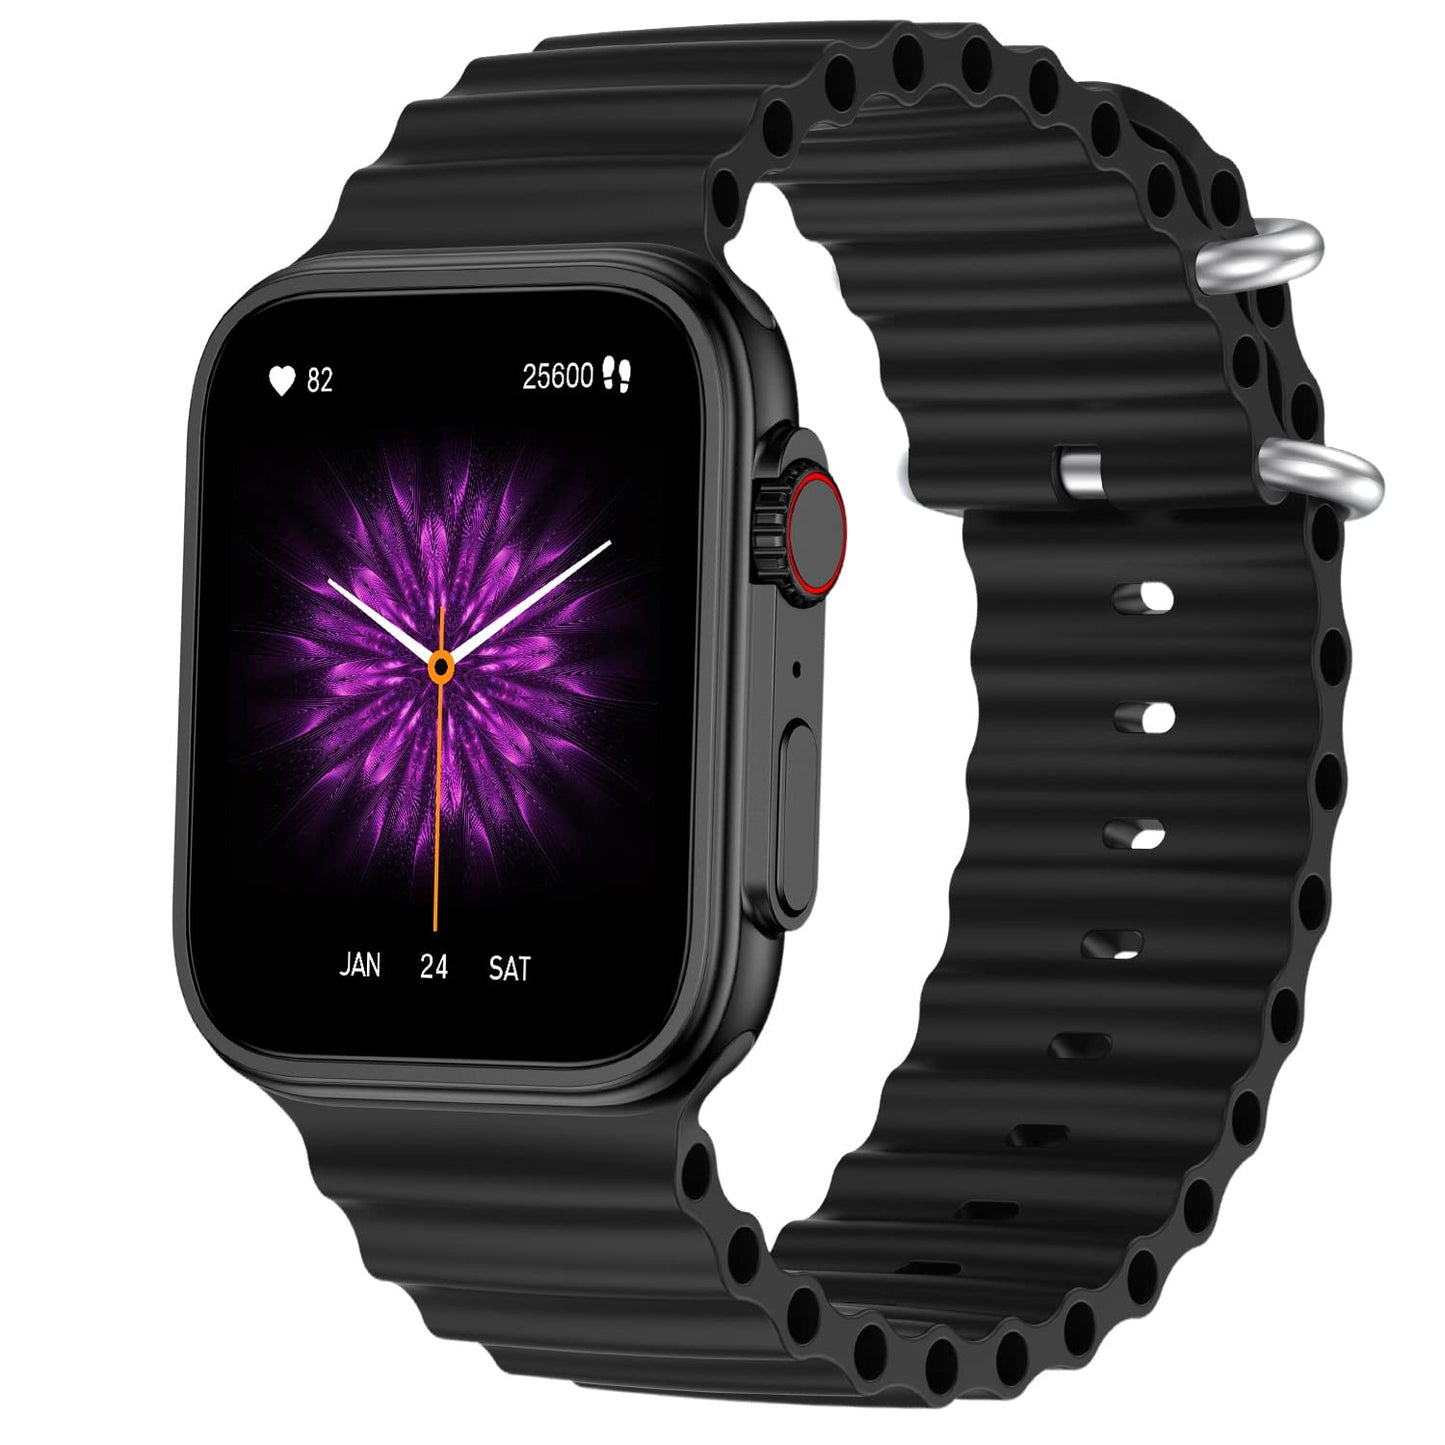  Fire Boltt  smart watch with  AI voice assistant 